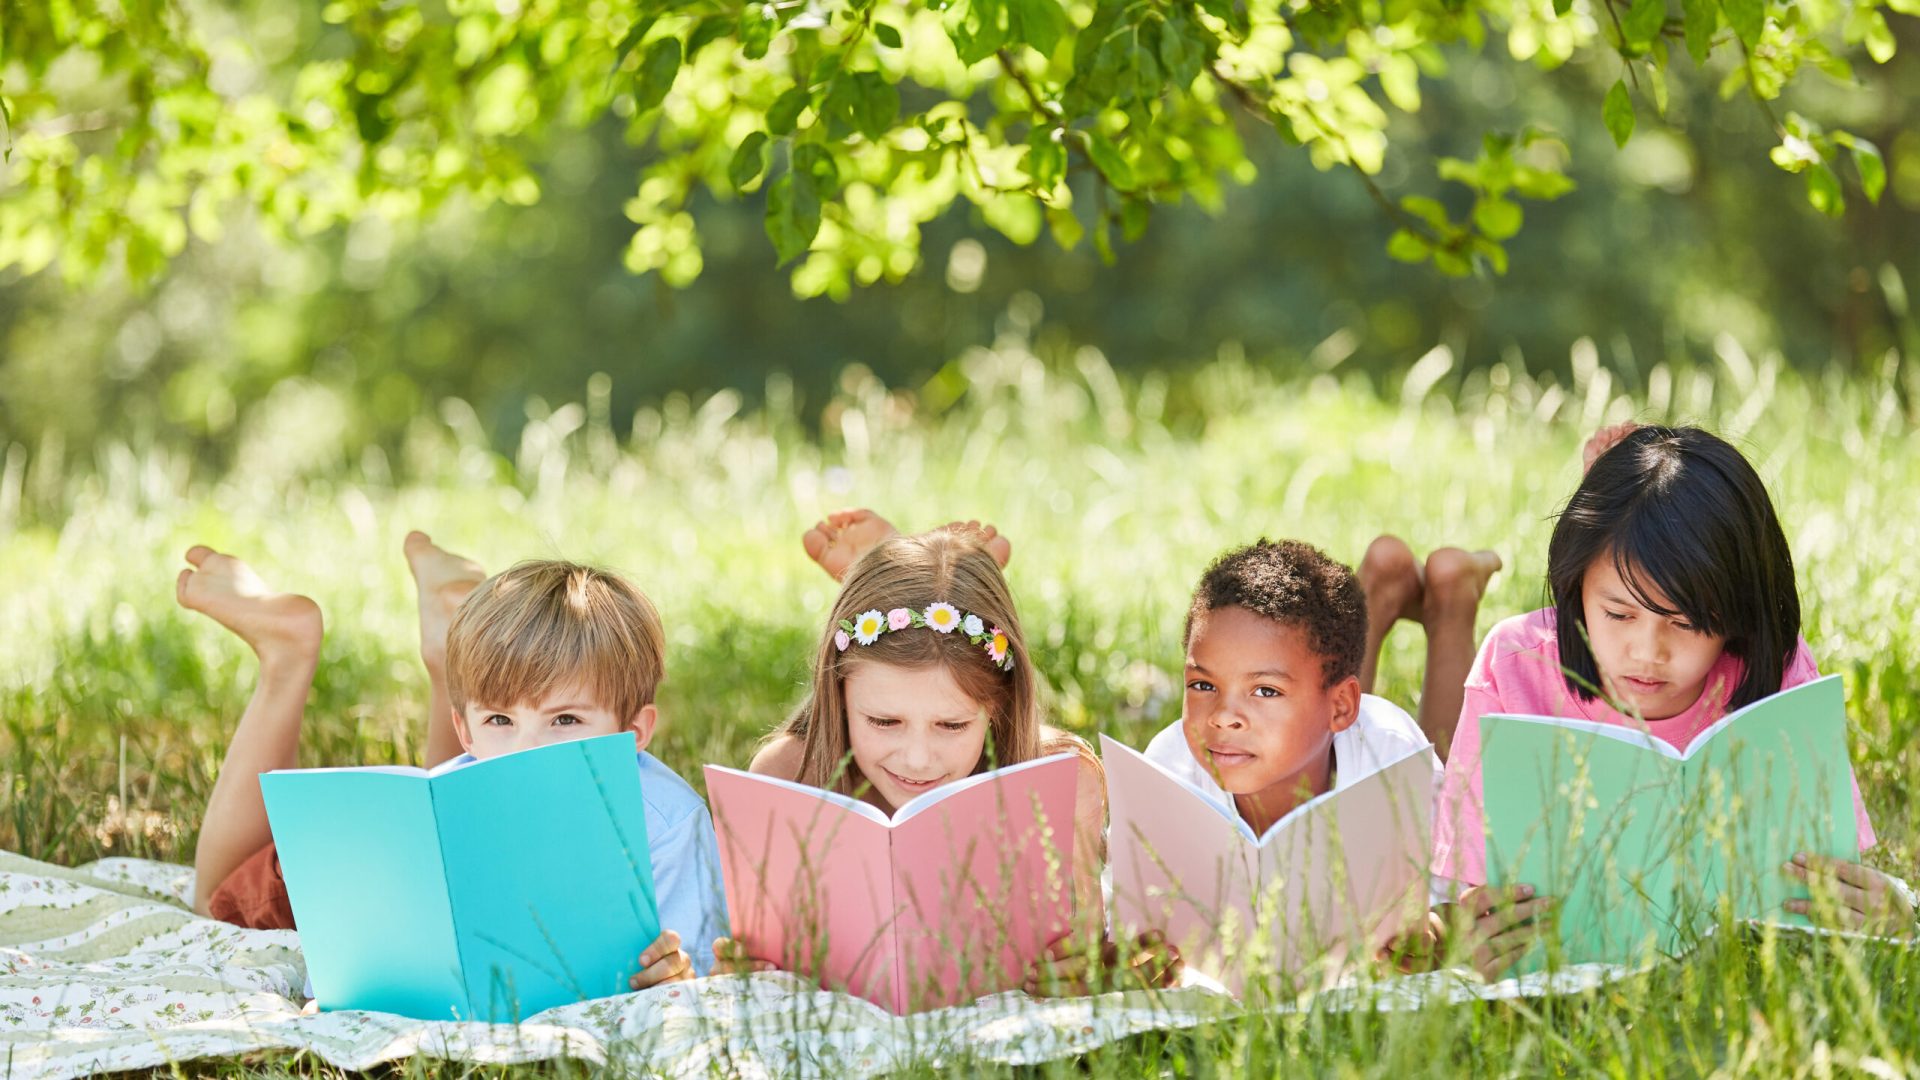 Multicultural,Group,Of,Children,Reading,While,Studying,In,The,Park